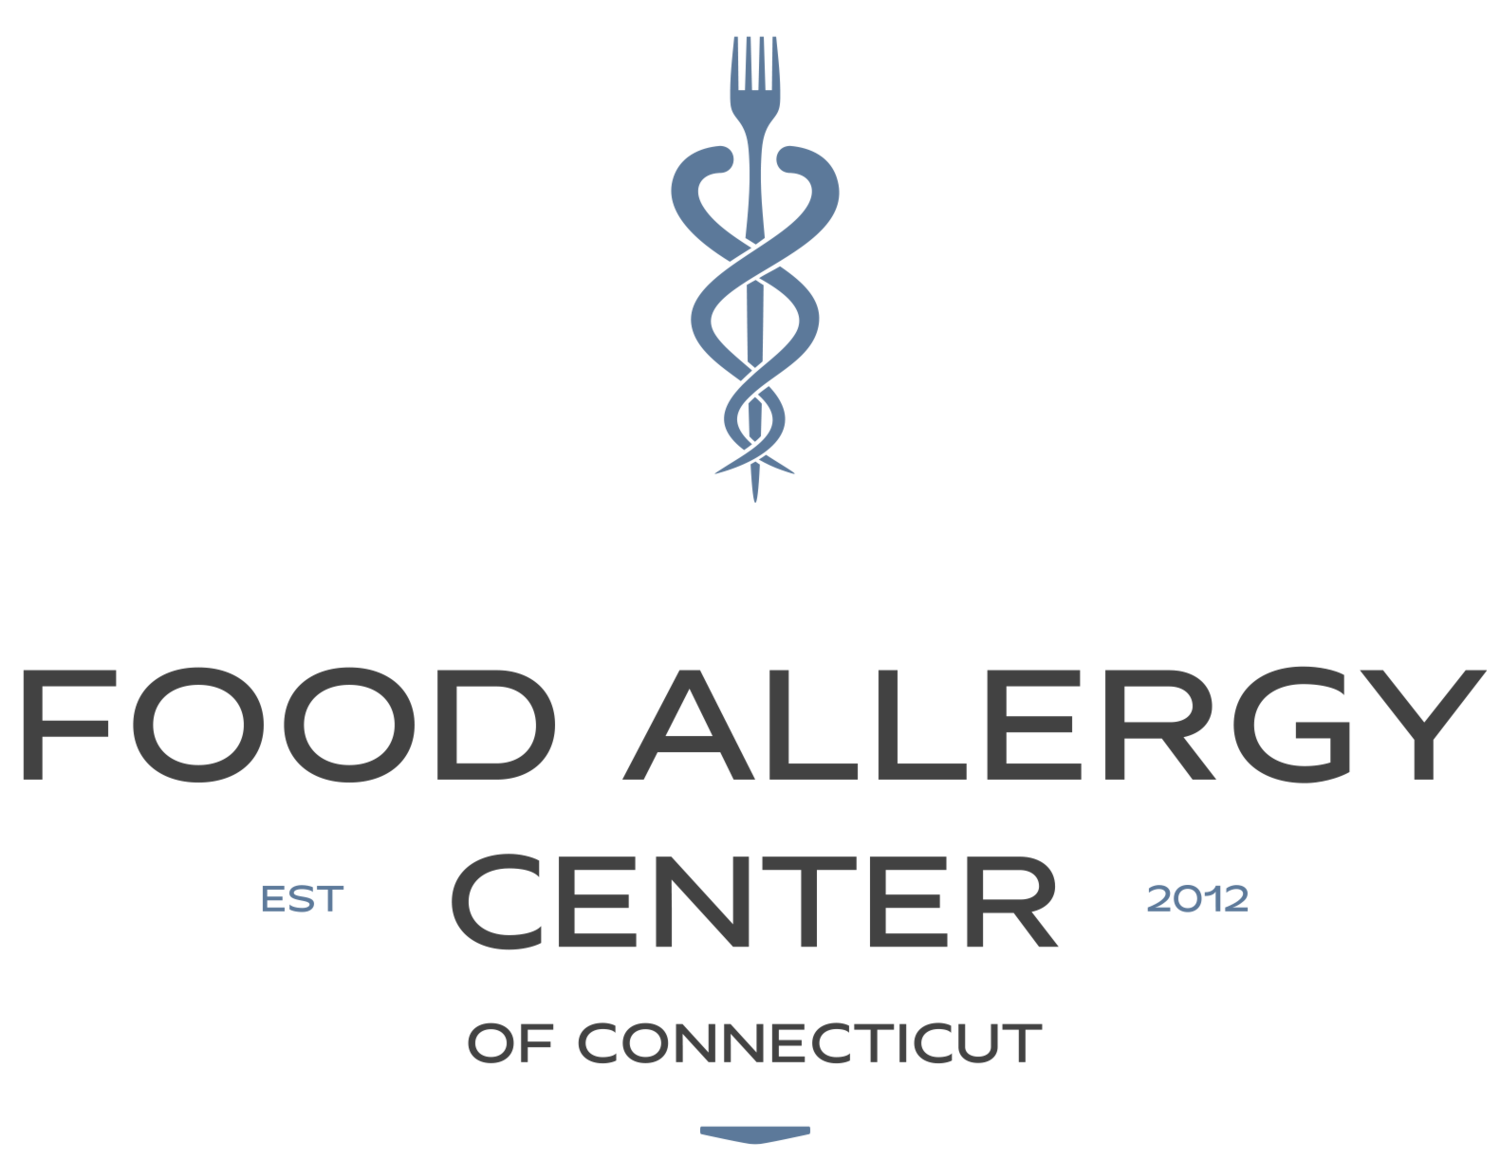 Food Allergy Center Of Connecticut